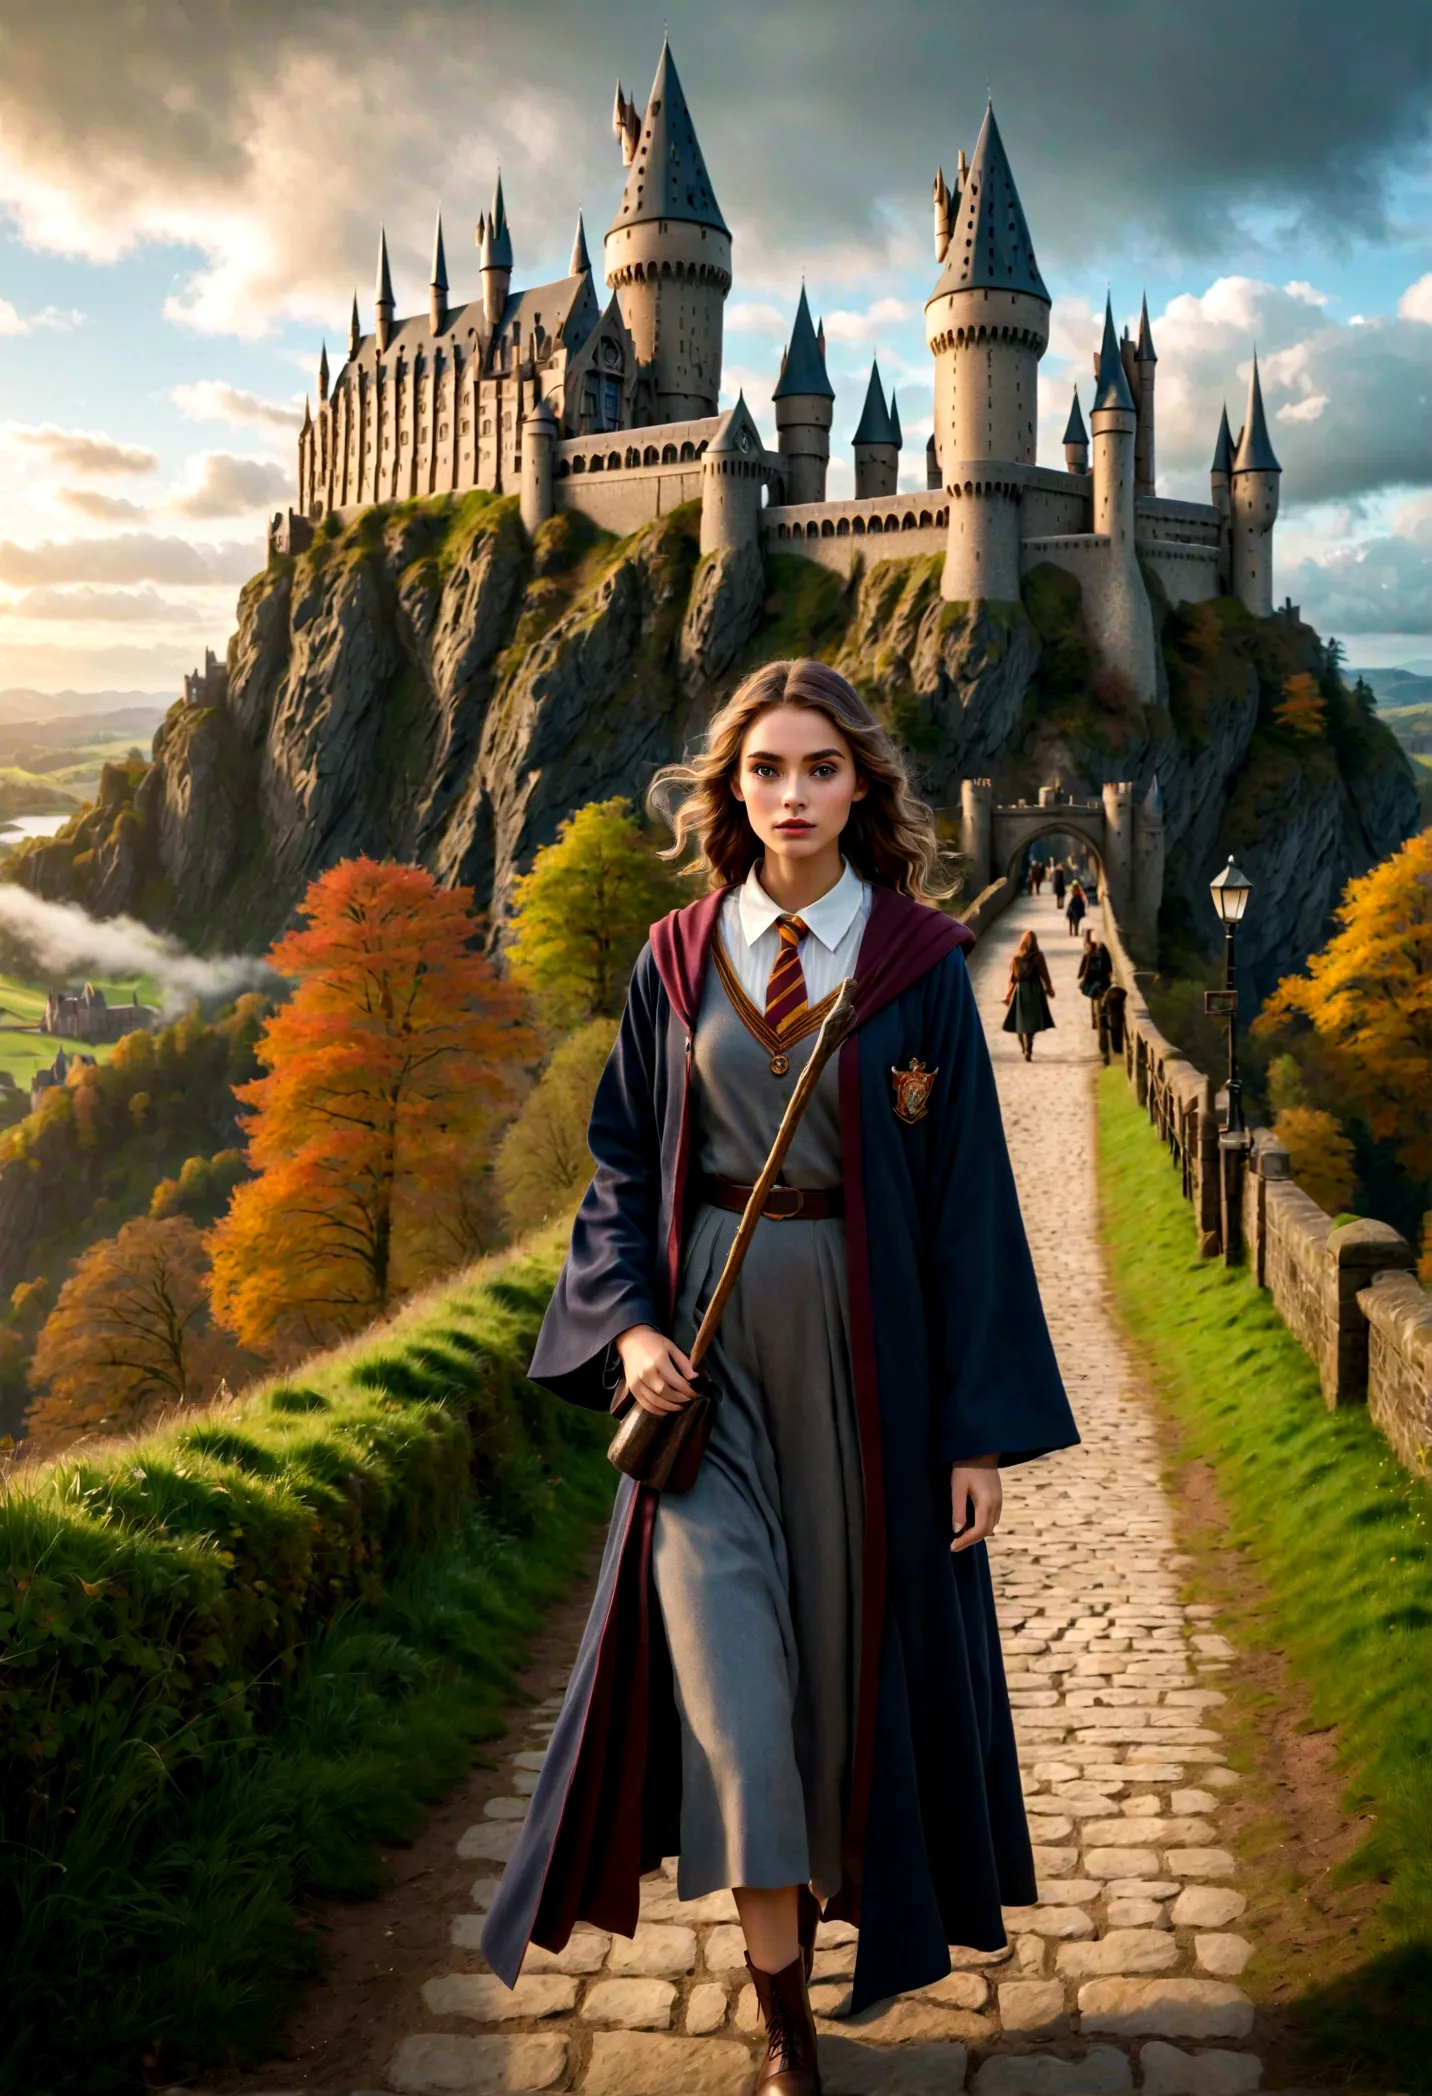 1 girl walking towards Hogwarts School of Witchcraft and Wizardry, beautiful detailed eyes, beautiful detailed lips, extremely d...